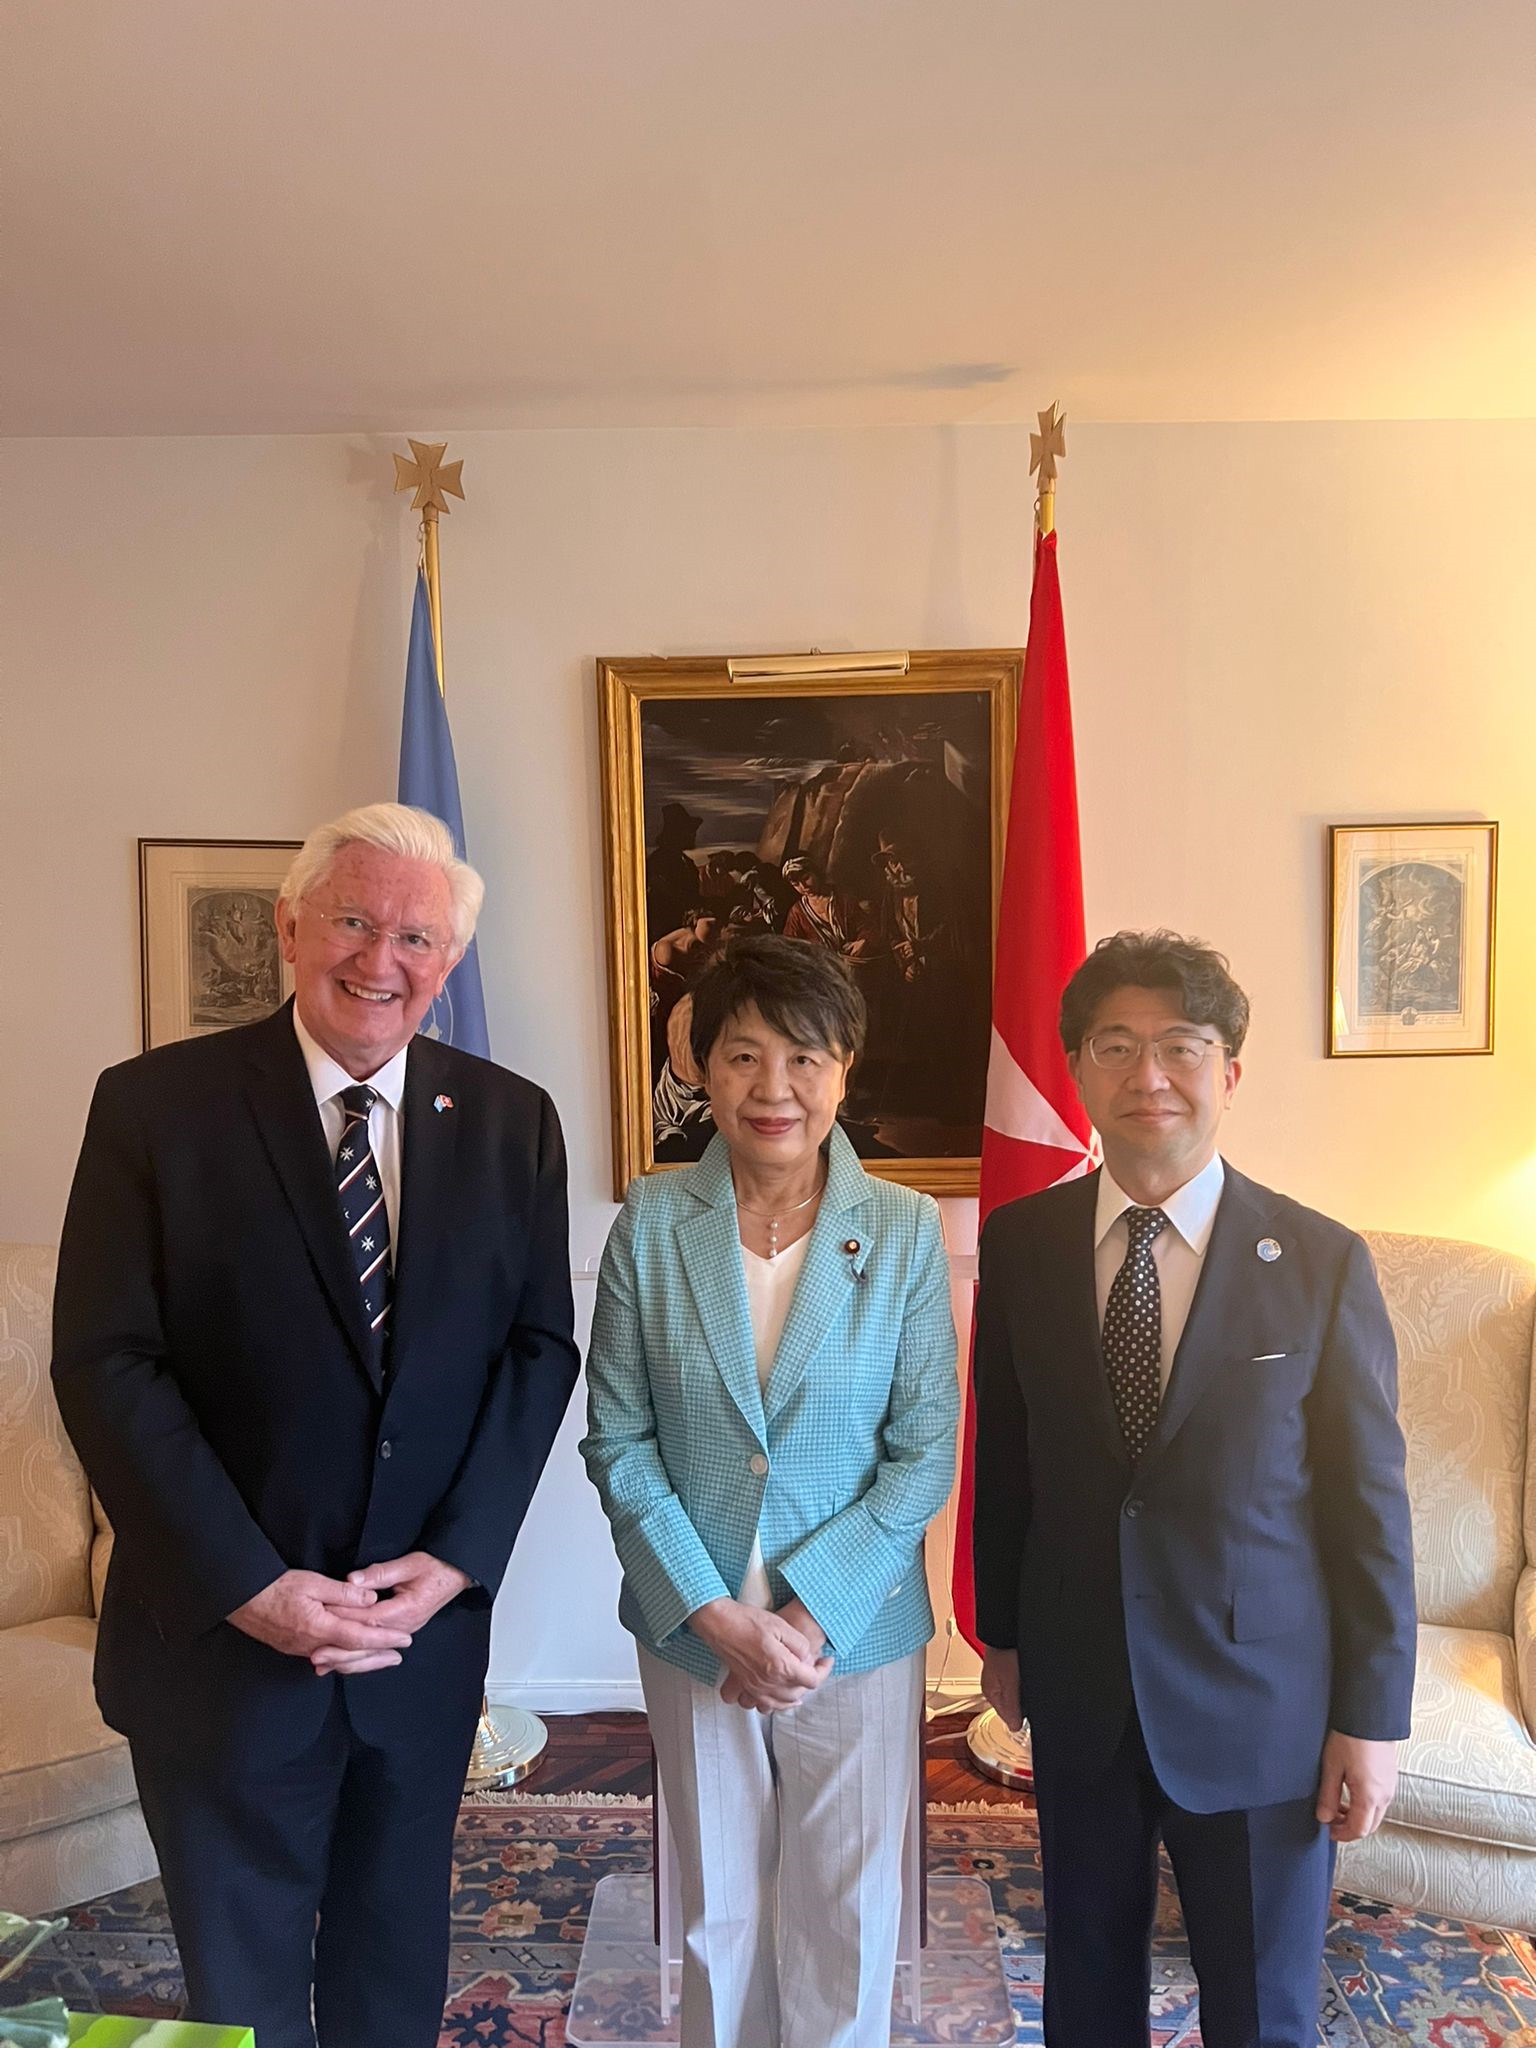 Delegation from Japan meets with Ambassador Beresford-Hill to discuss cooperation between the Sasakawa Peace Foundation and the Sovereign Order of Malta